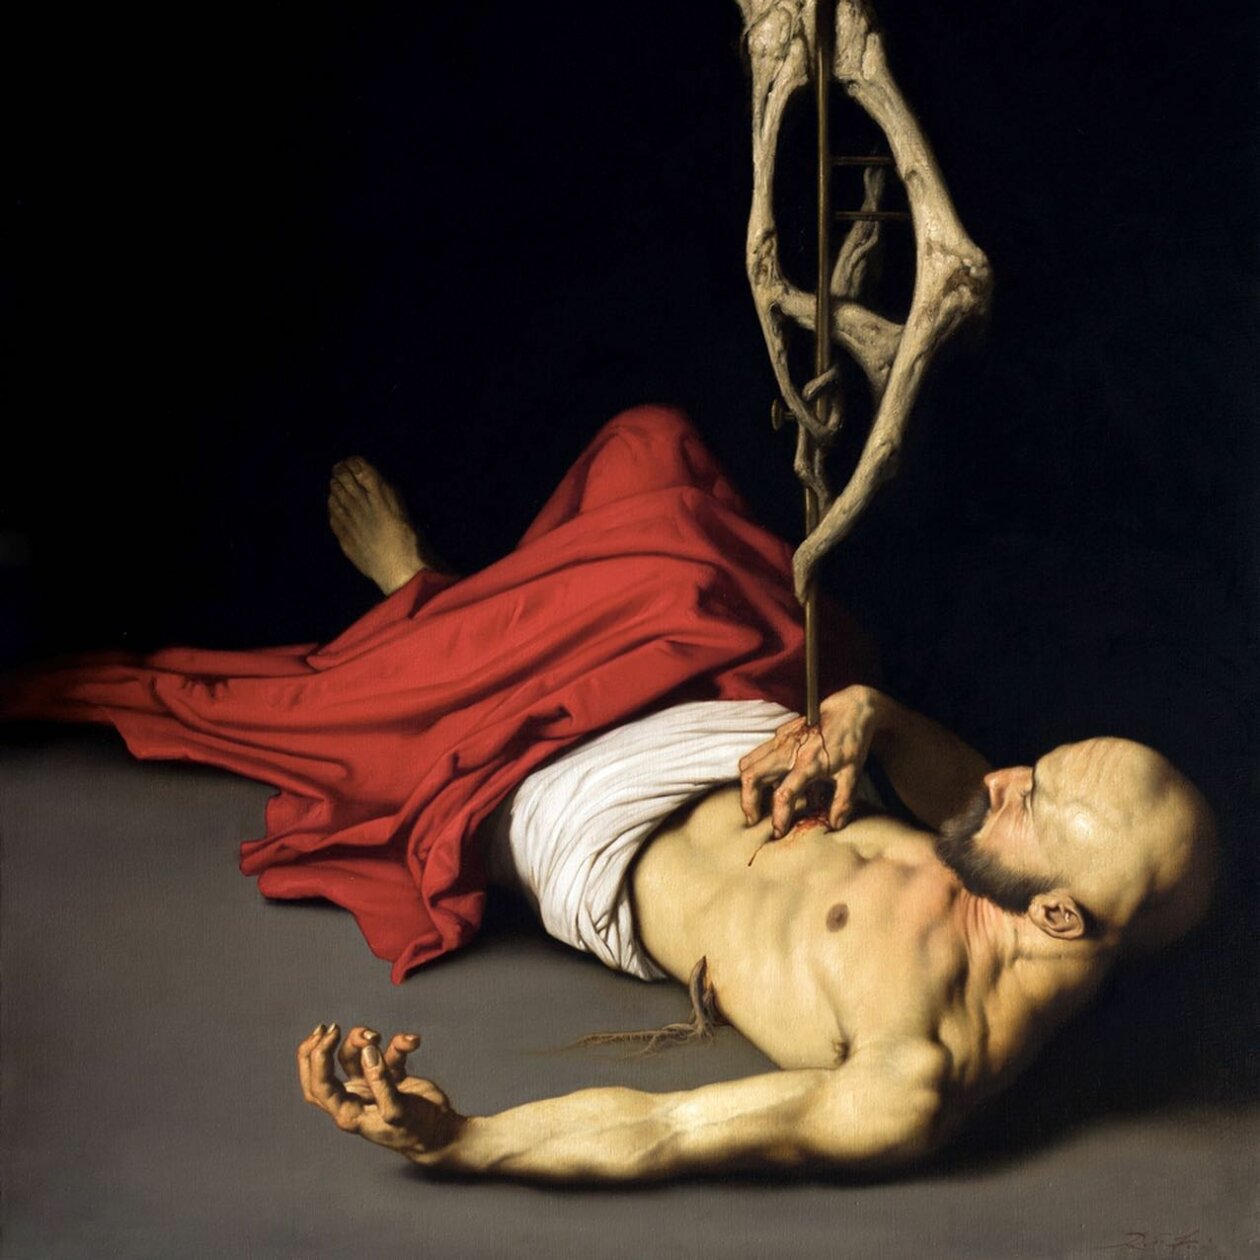 Baroque And Surrealism, Formidable Neoclassical Paintings By Roberto Ferri (13)